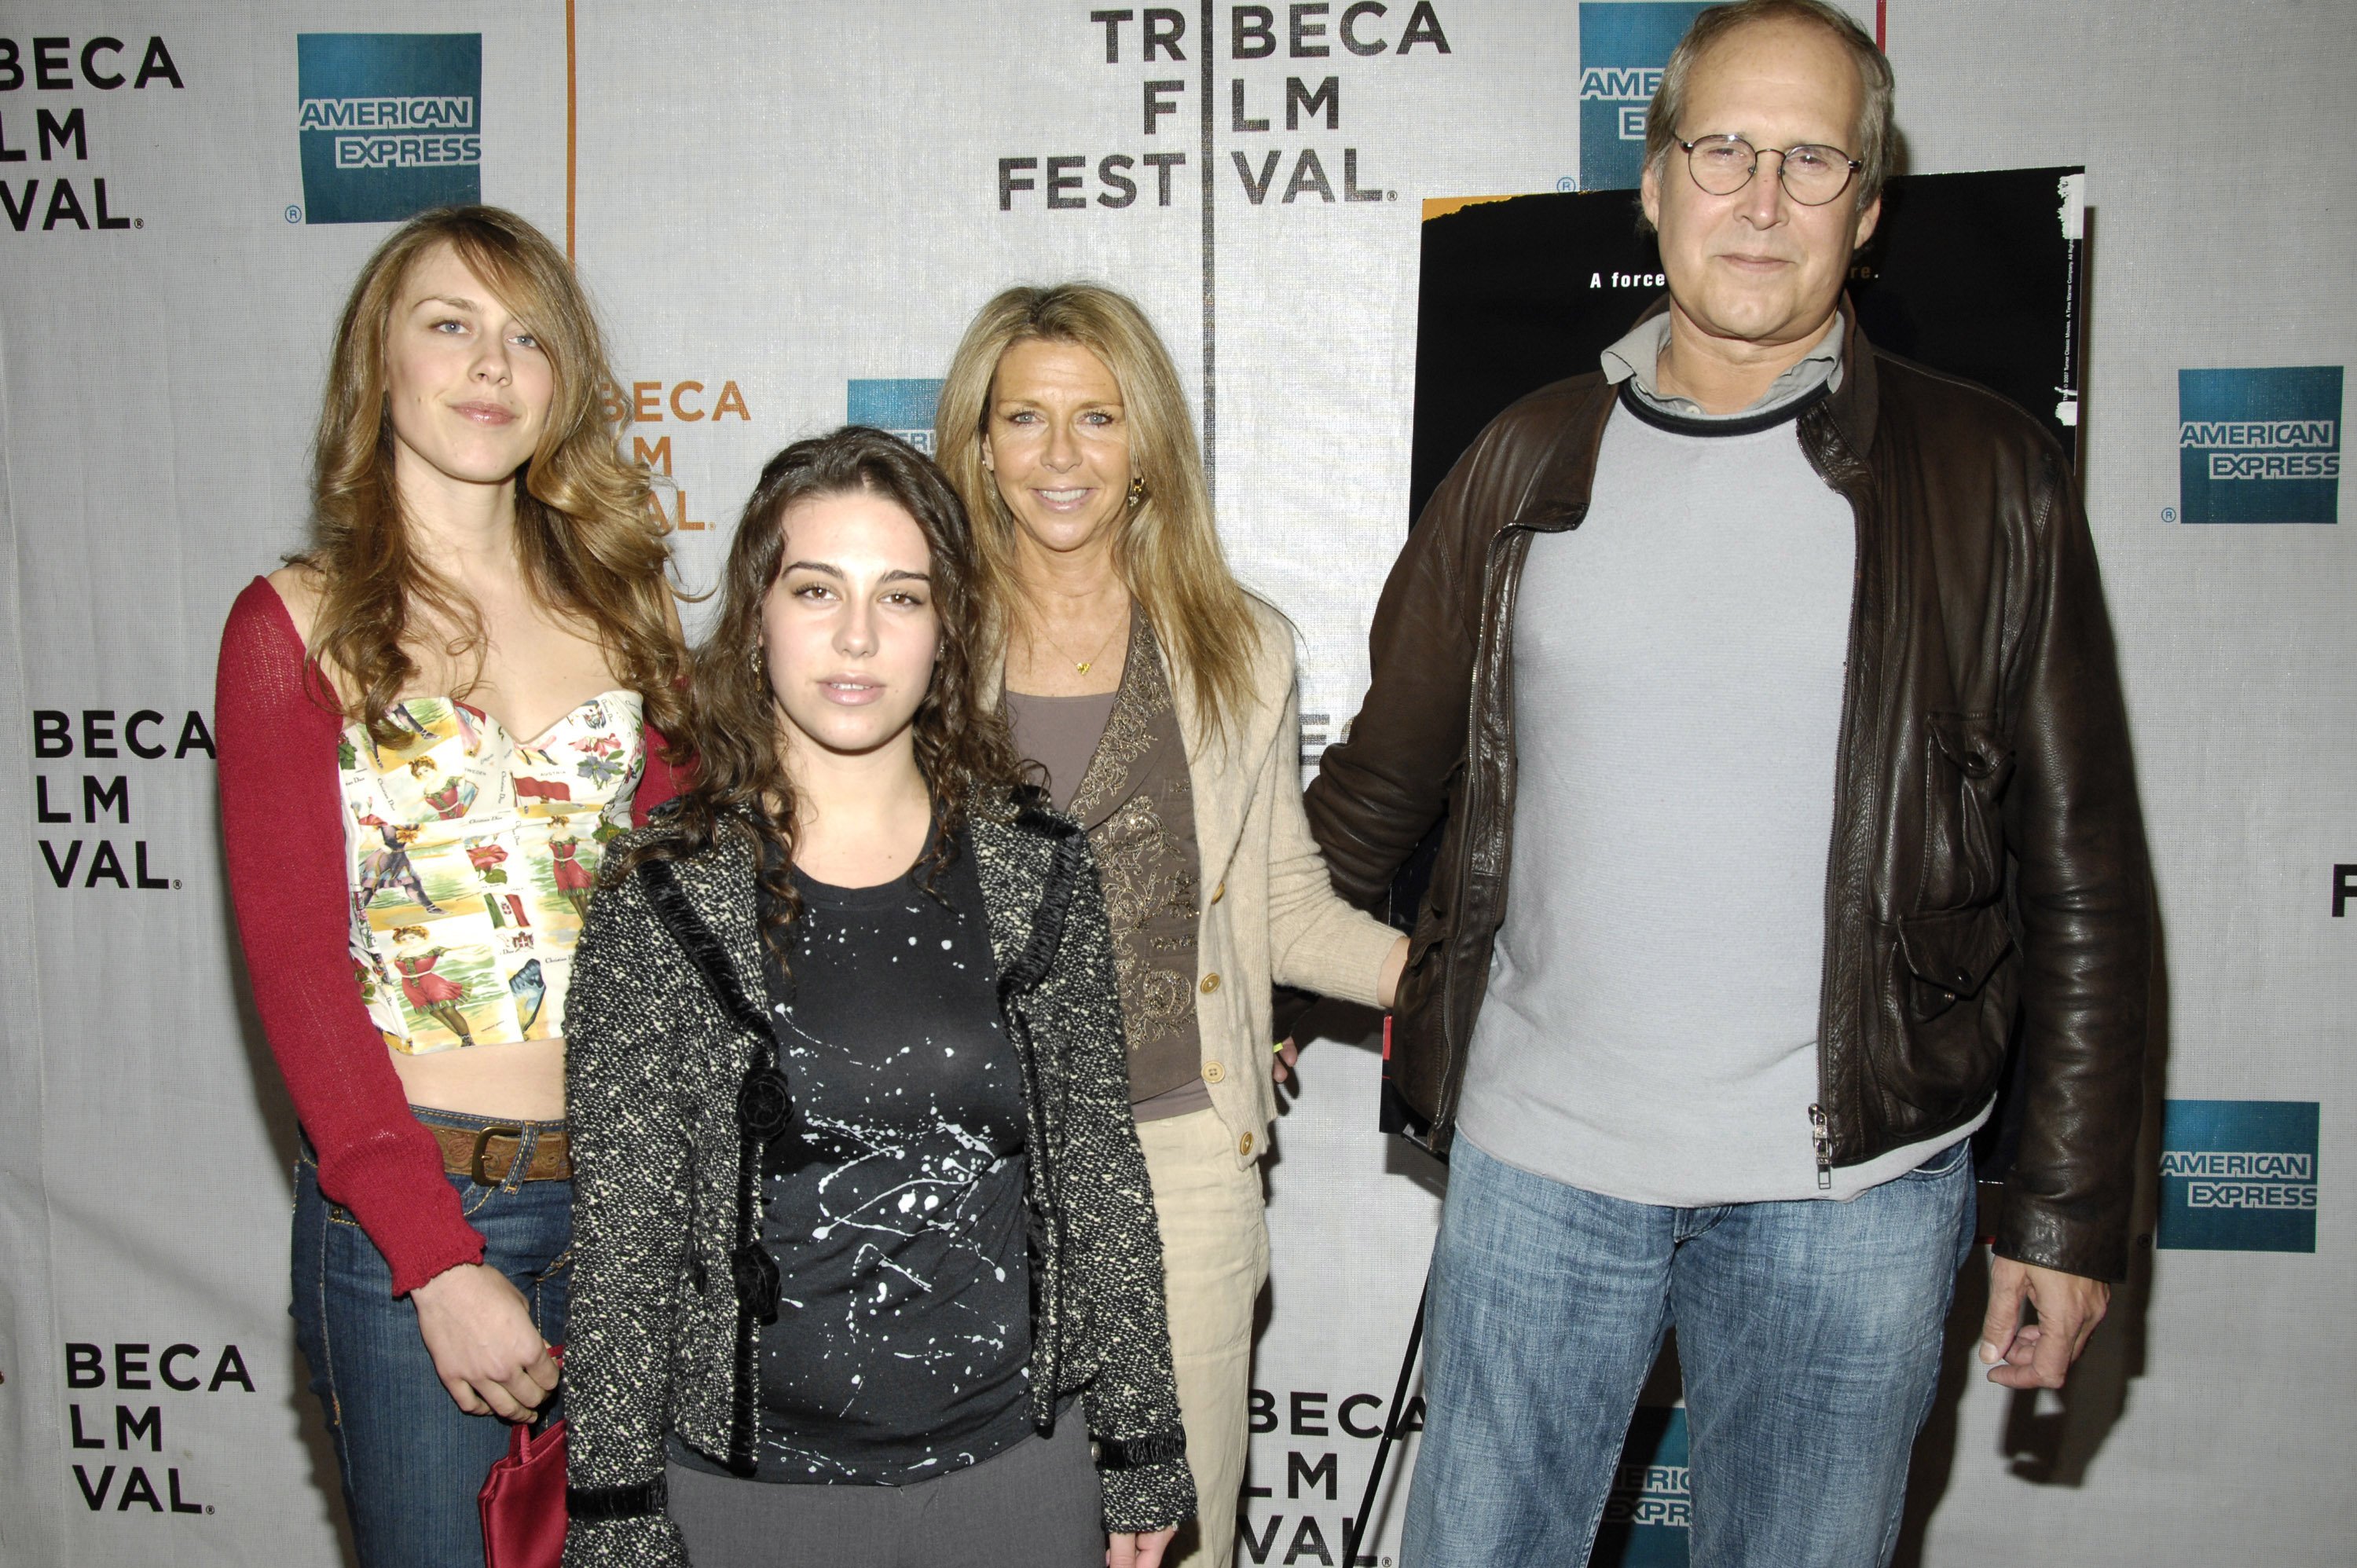 Cydney Chase, Caley Chase, Jayni Chase, and Chevy Chase at the screening of "Brando" on April 26, 2007 | Source: Getty Images